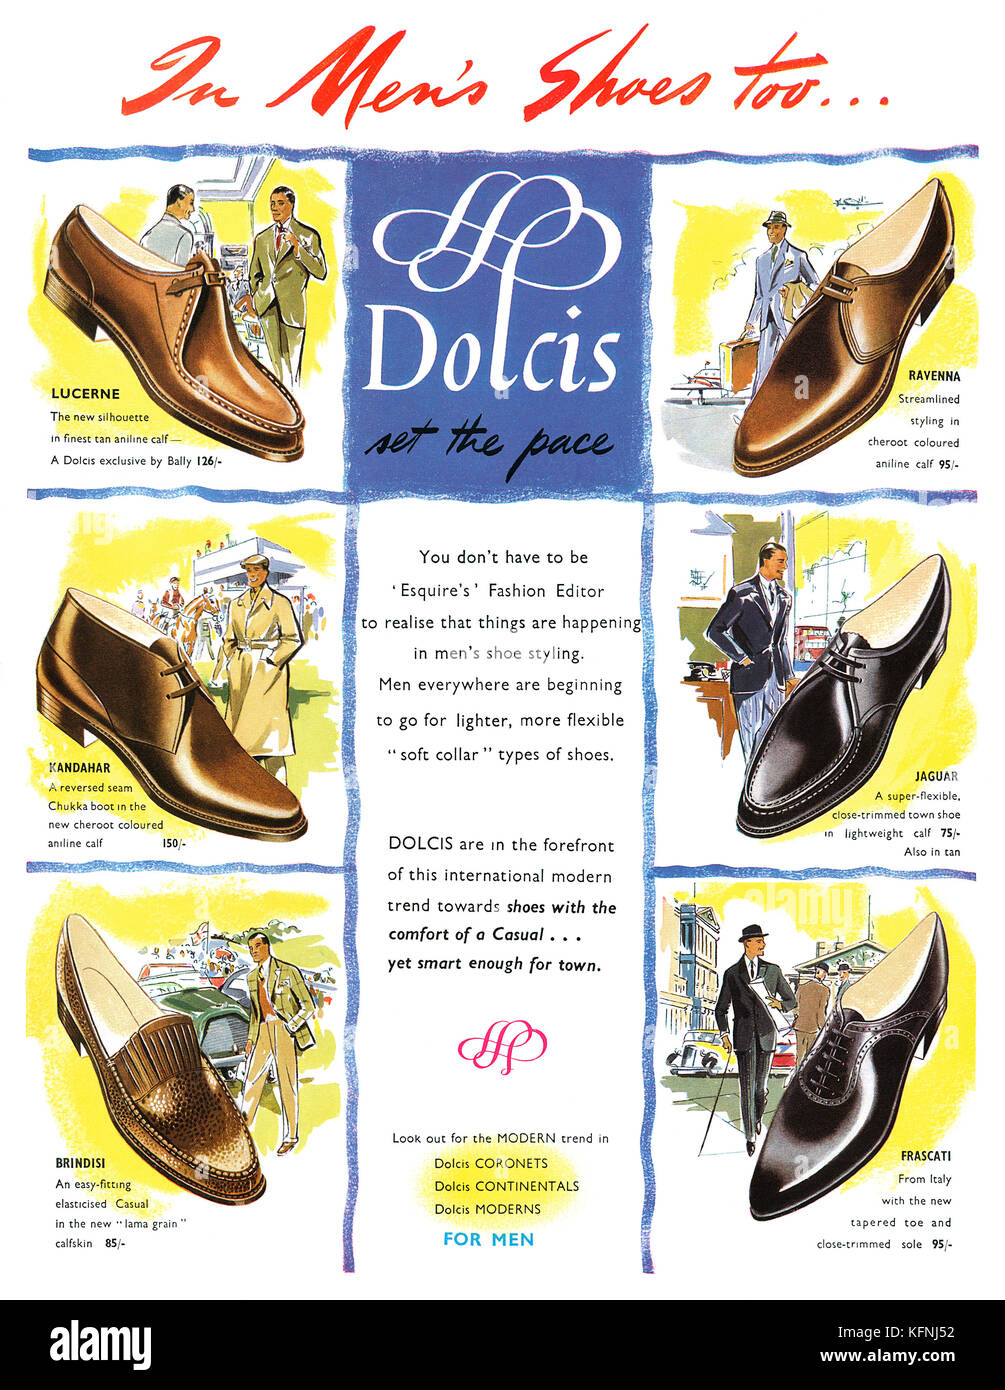 1954 British advertisement for Dolcis men's shoes Stock Photo - Alamy